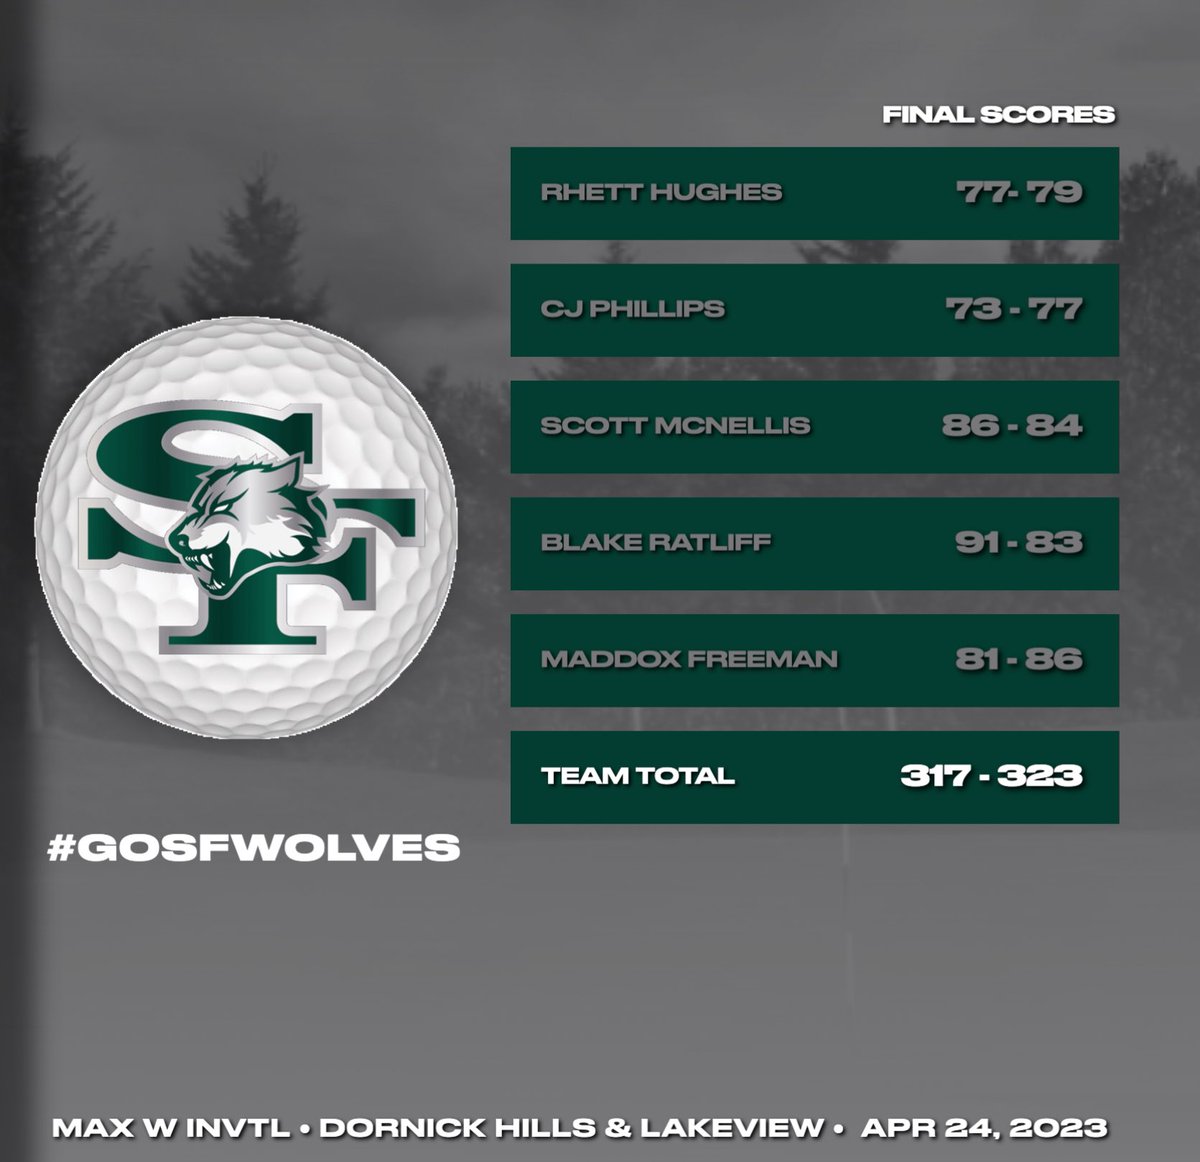 Final results from Ardmore on 4/24. Regionals up next on Monday. 🐺 #gosfwolves